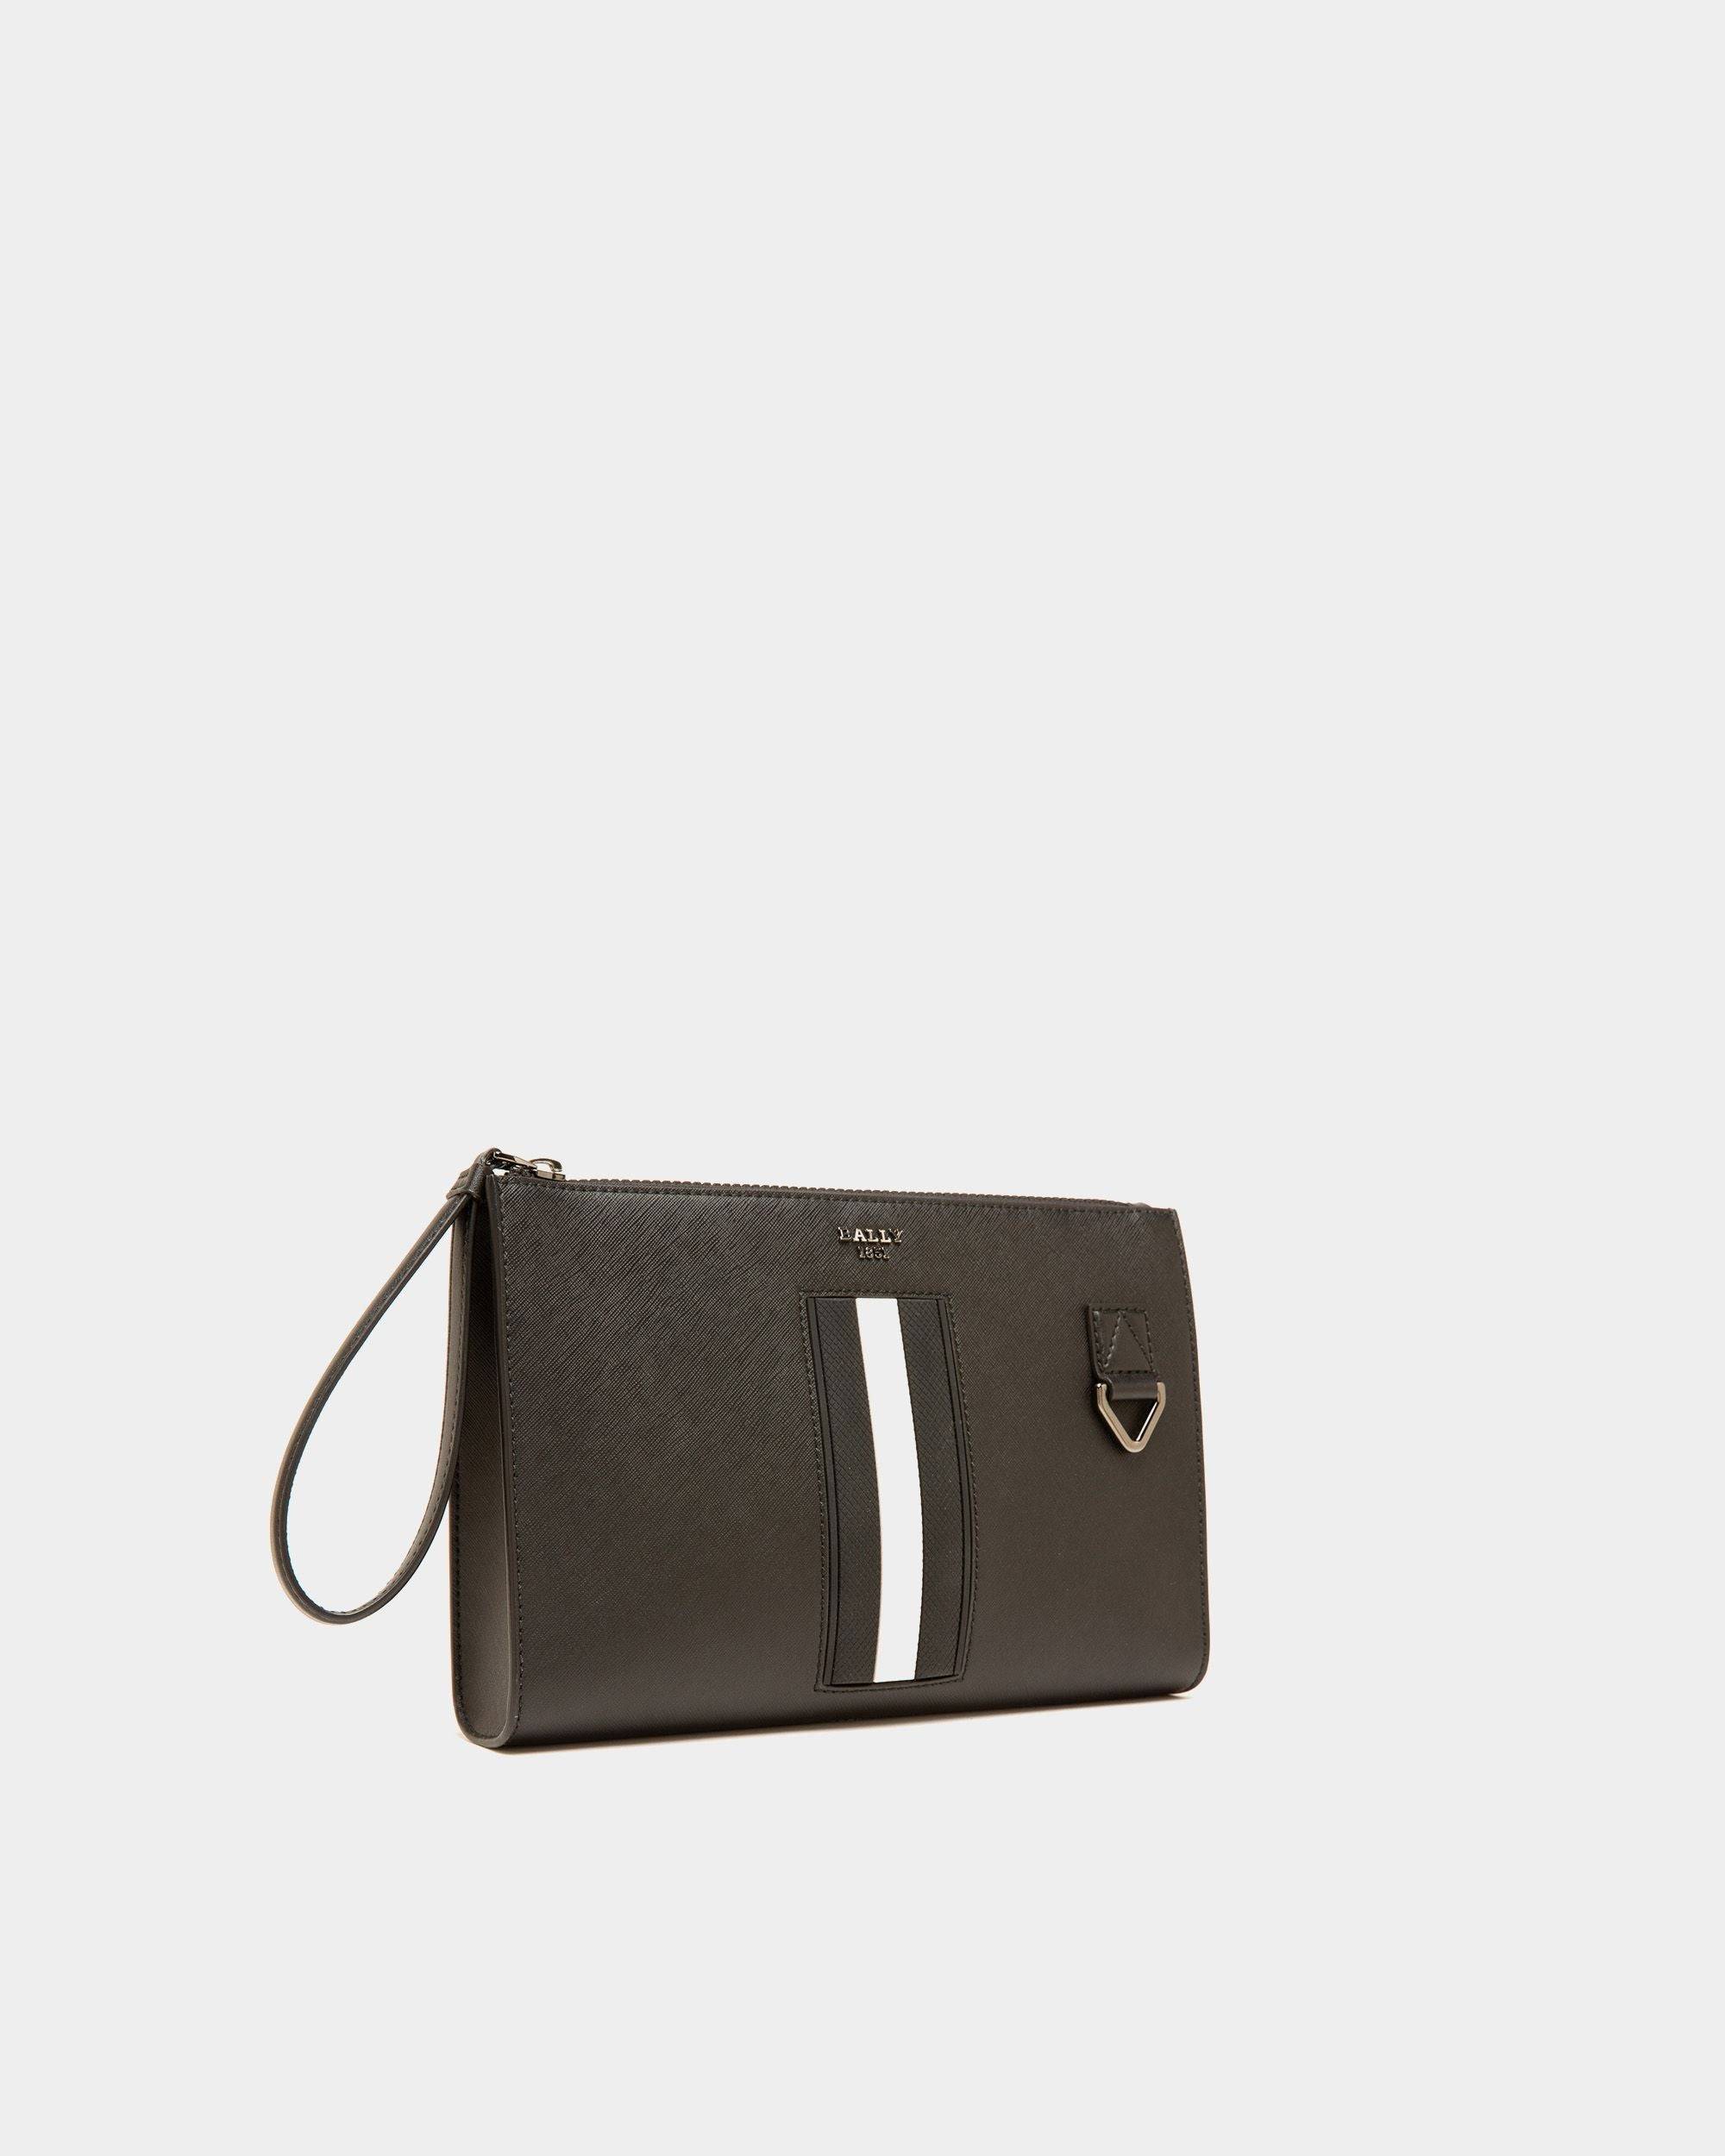 Makid | Men's Clutch | Black Leather | Bally | Still Life 3/4 Front